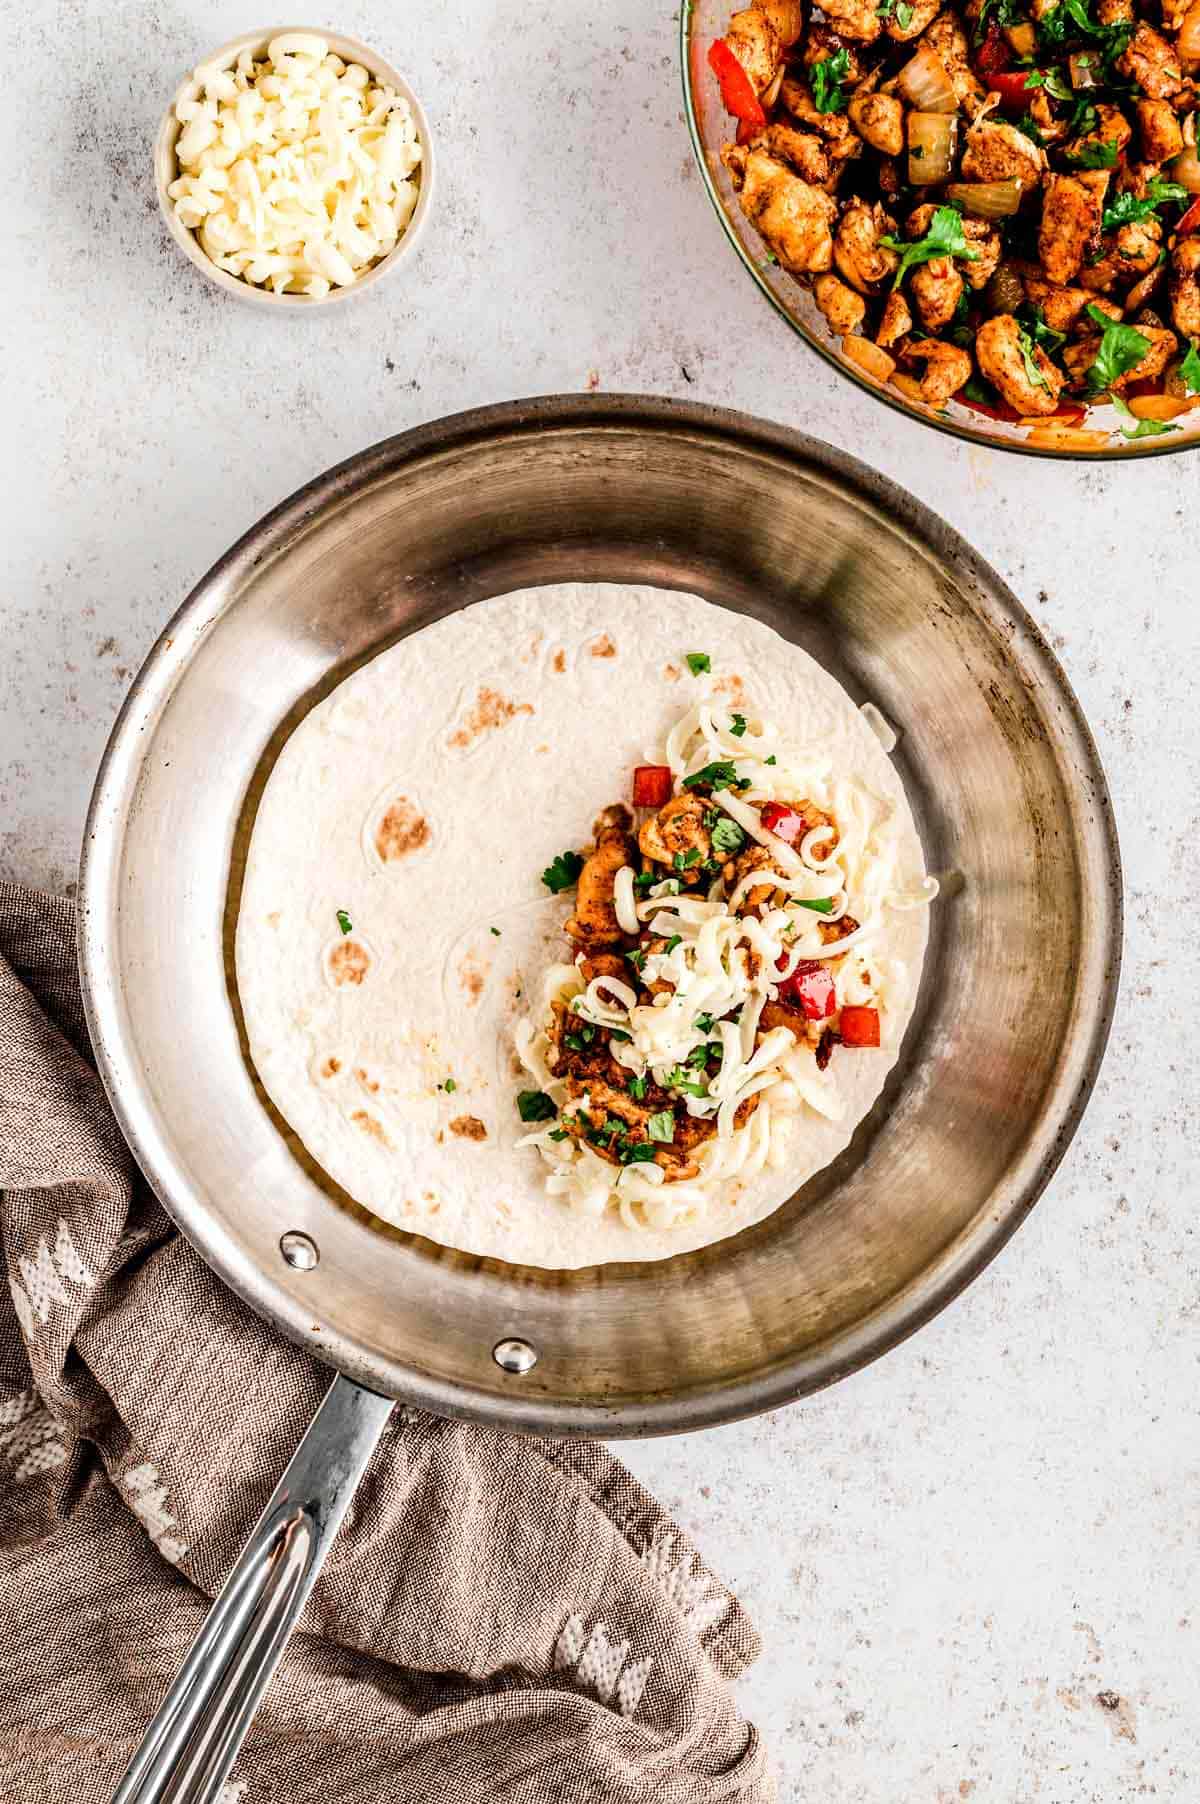 Chicken mixture on one half of a tortilla in a frying pan.